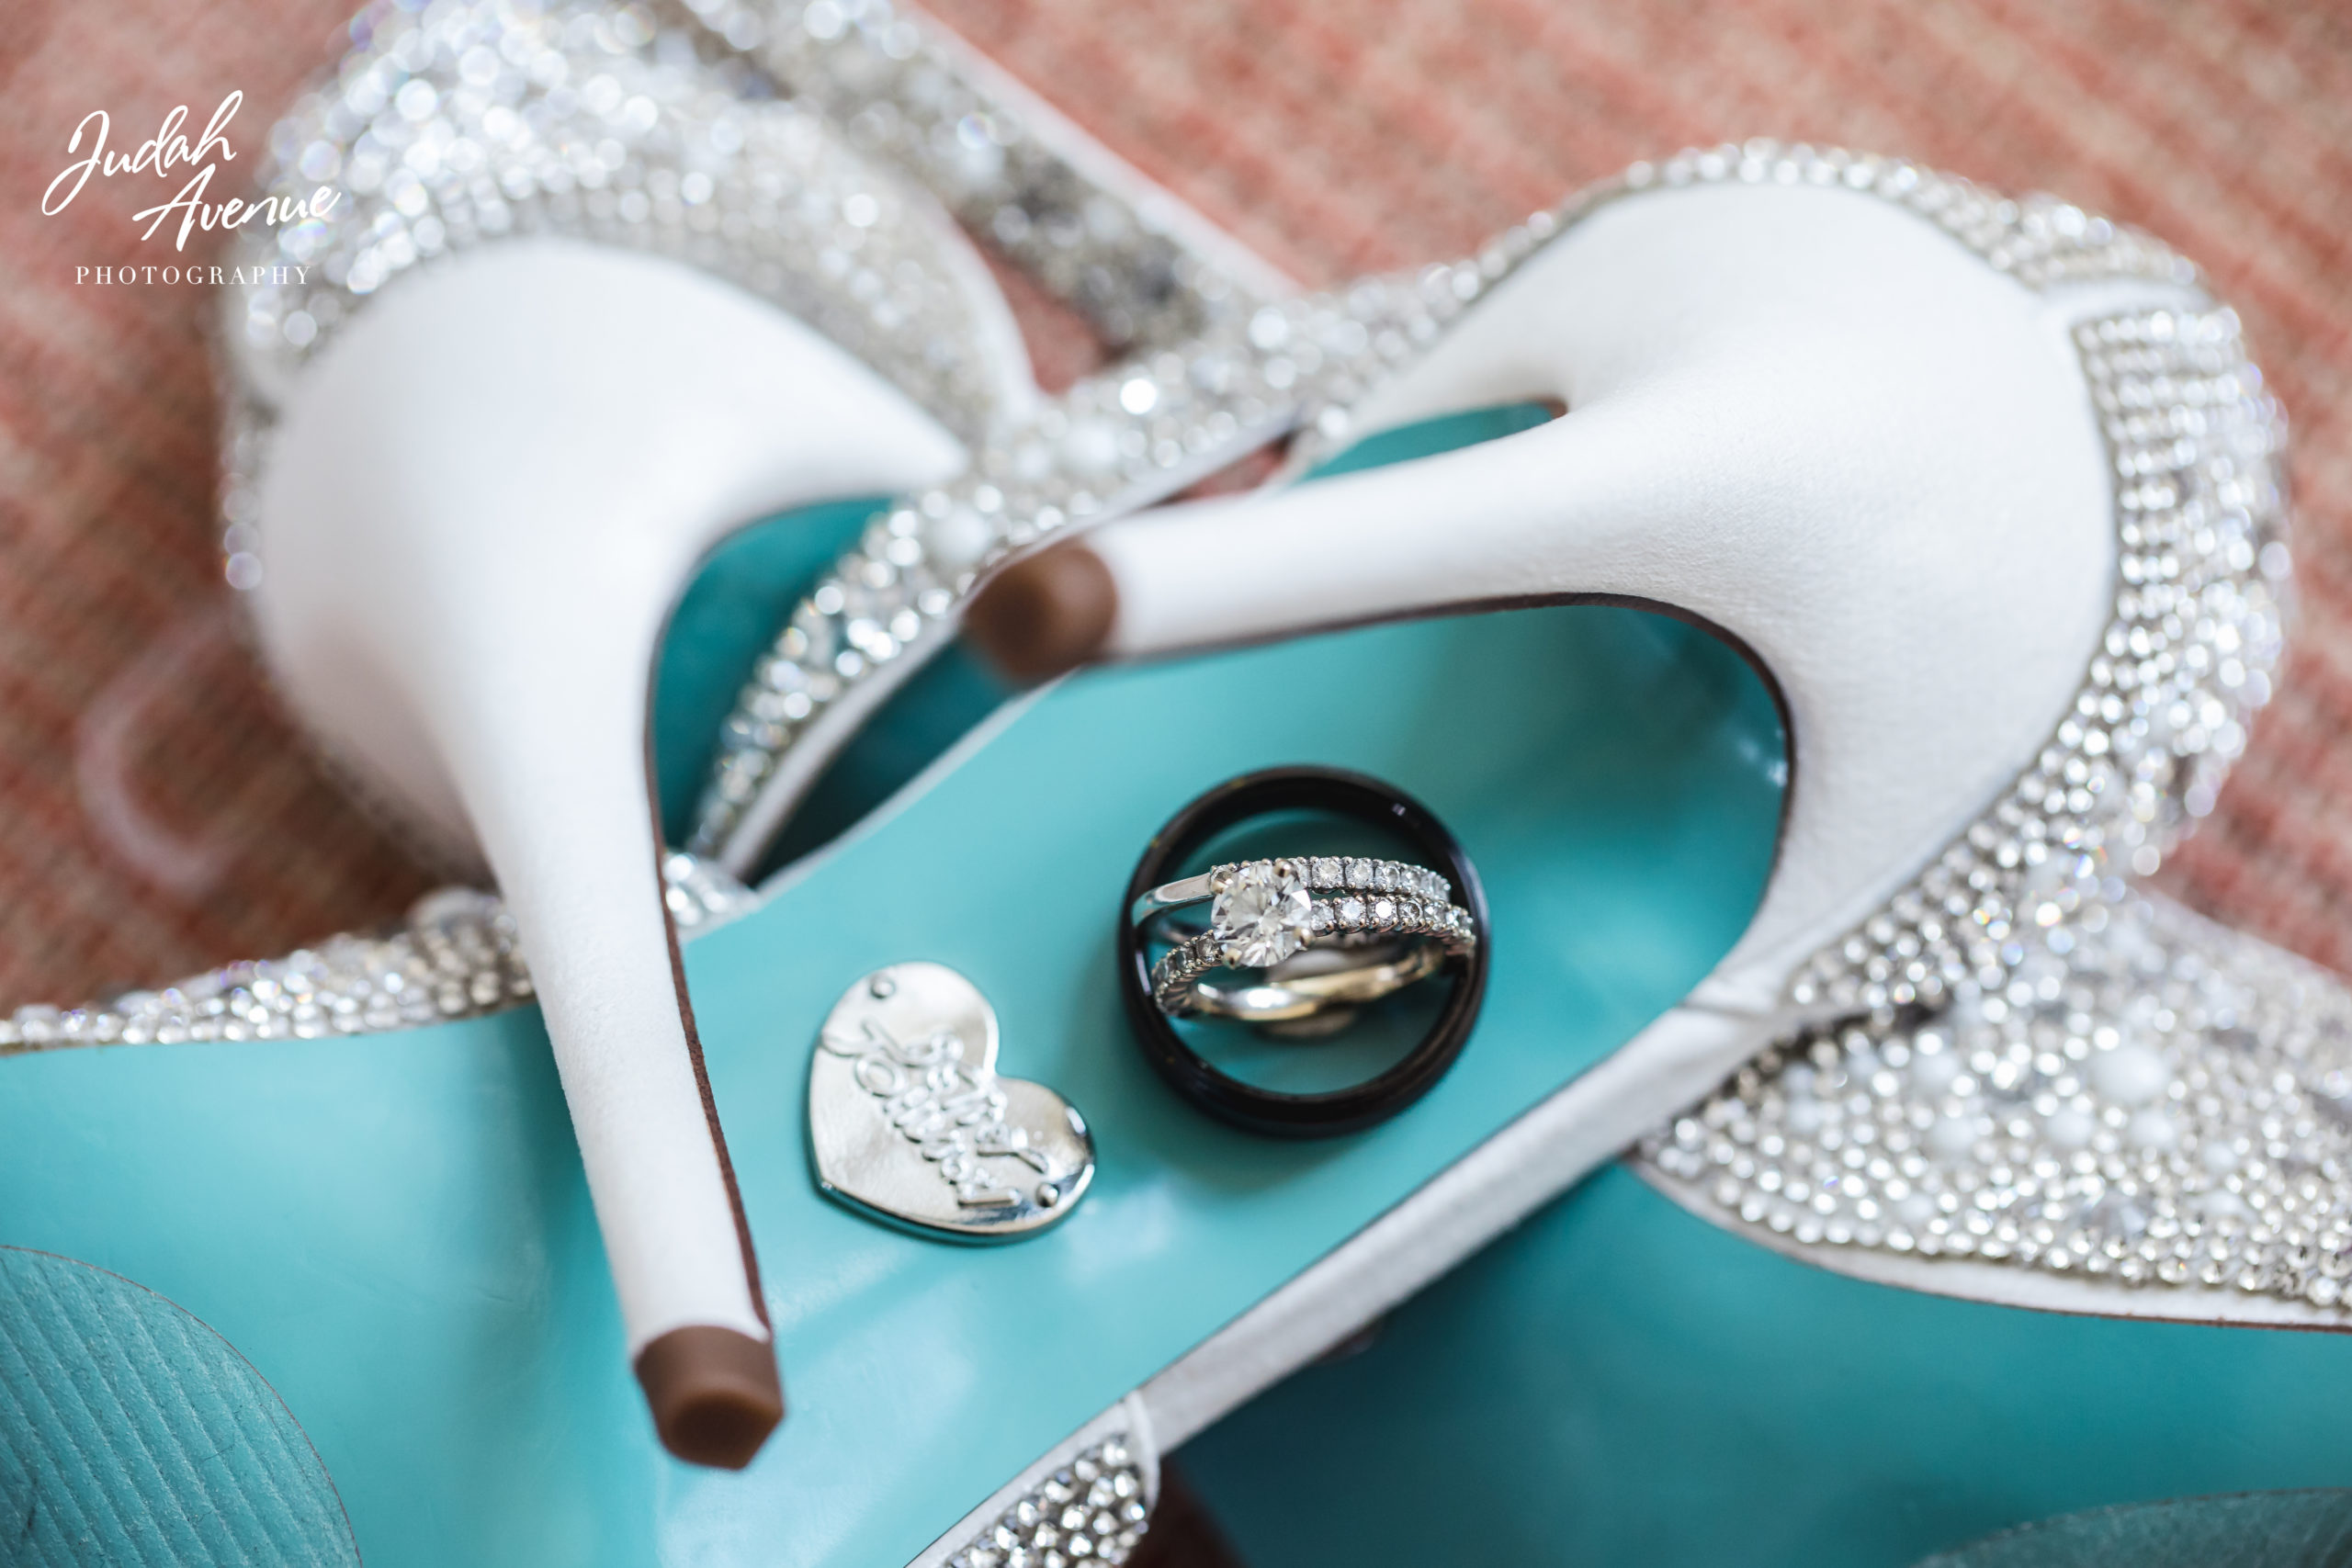 Wedding Rings and Shoes